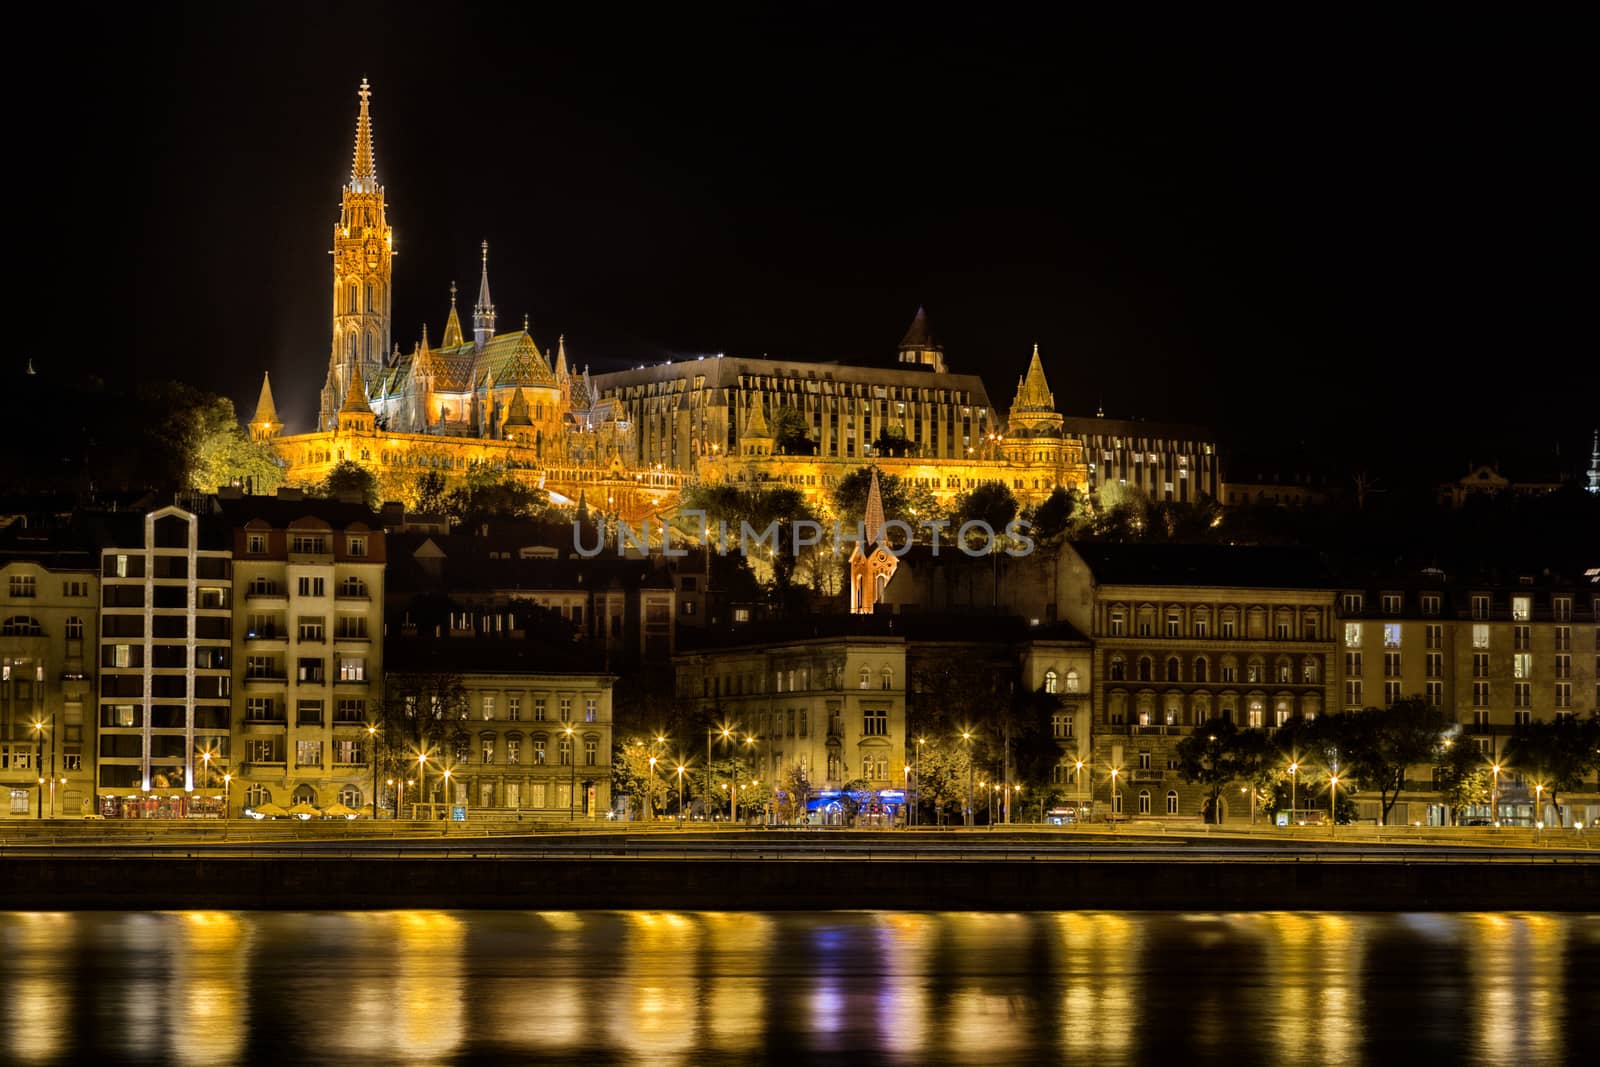 A  night view of the palaces on the Danube river in Budapest in Hungary: